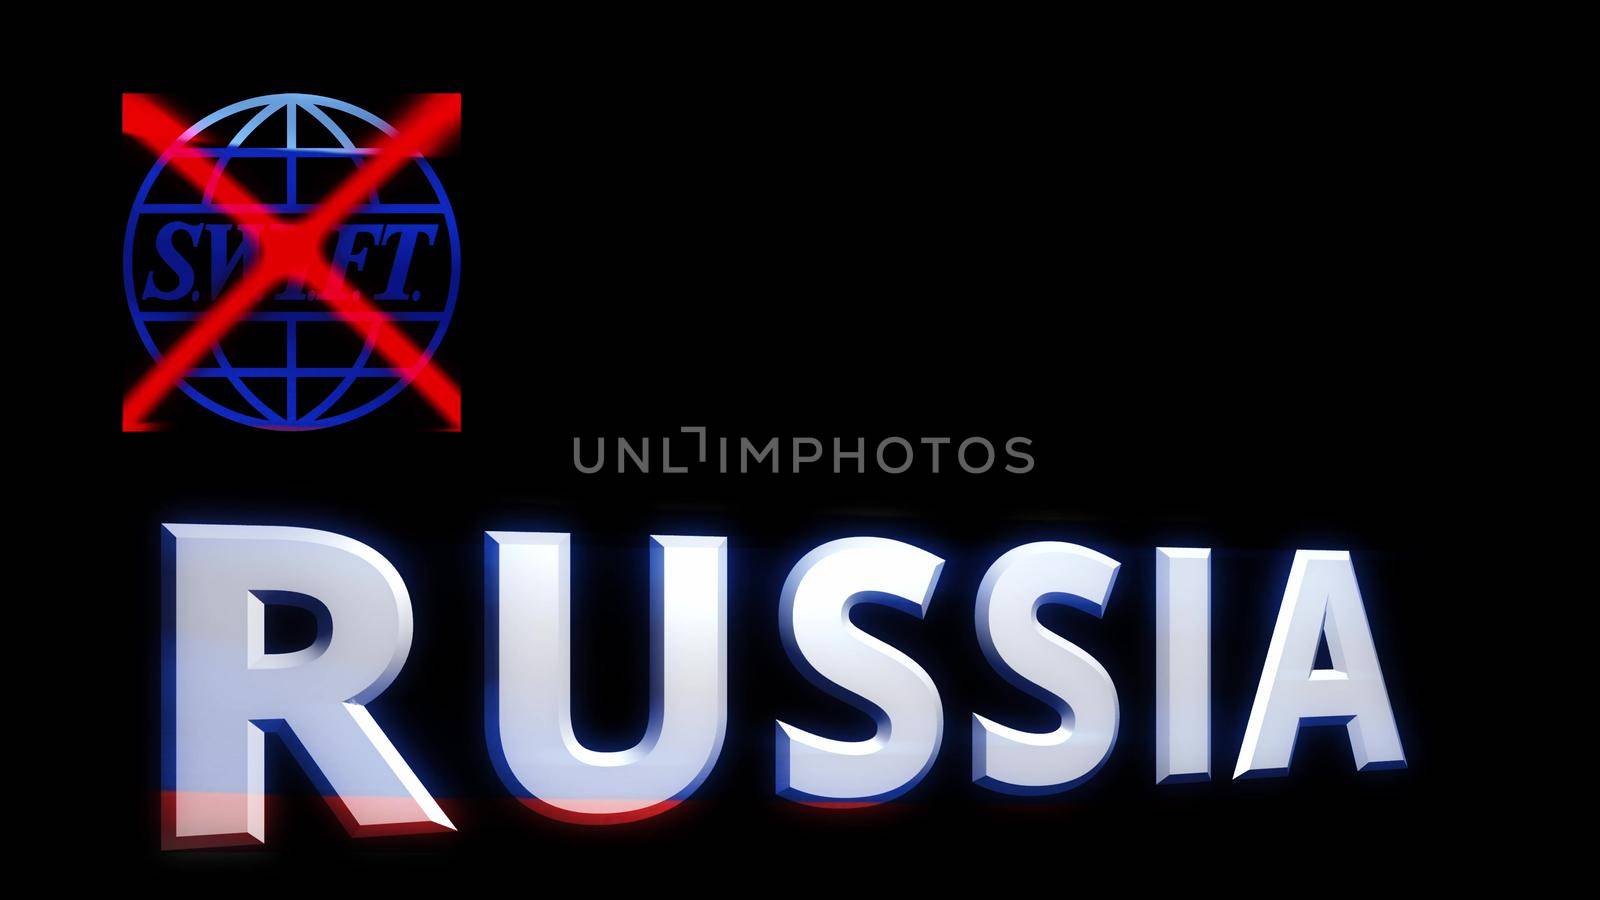 Russia, Syzran - FEBRUARY 27, 2022: Russia and the crossed-out swift sign, animated text on a black background, disconnecting Russia from international payments, imposing sanctions by vadiar